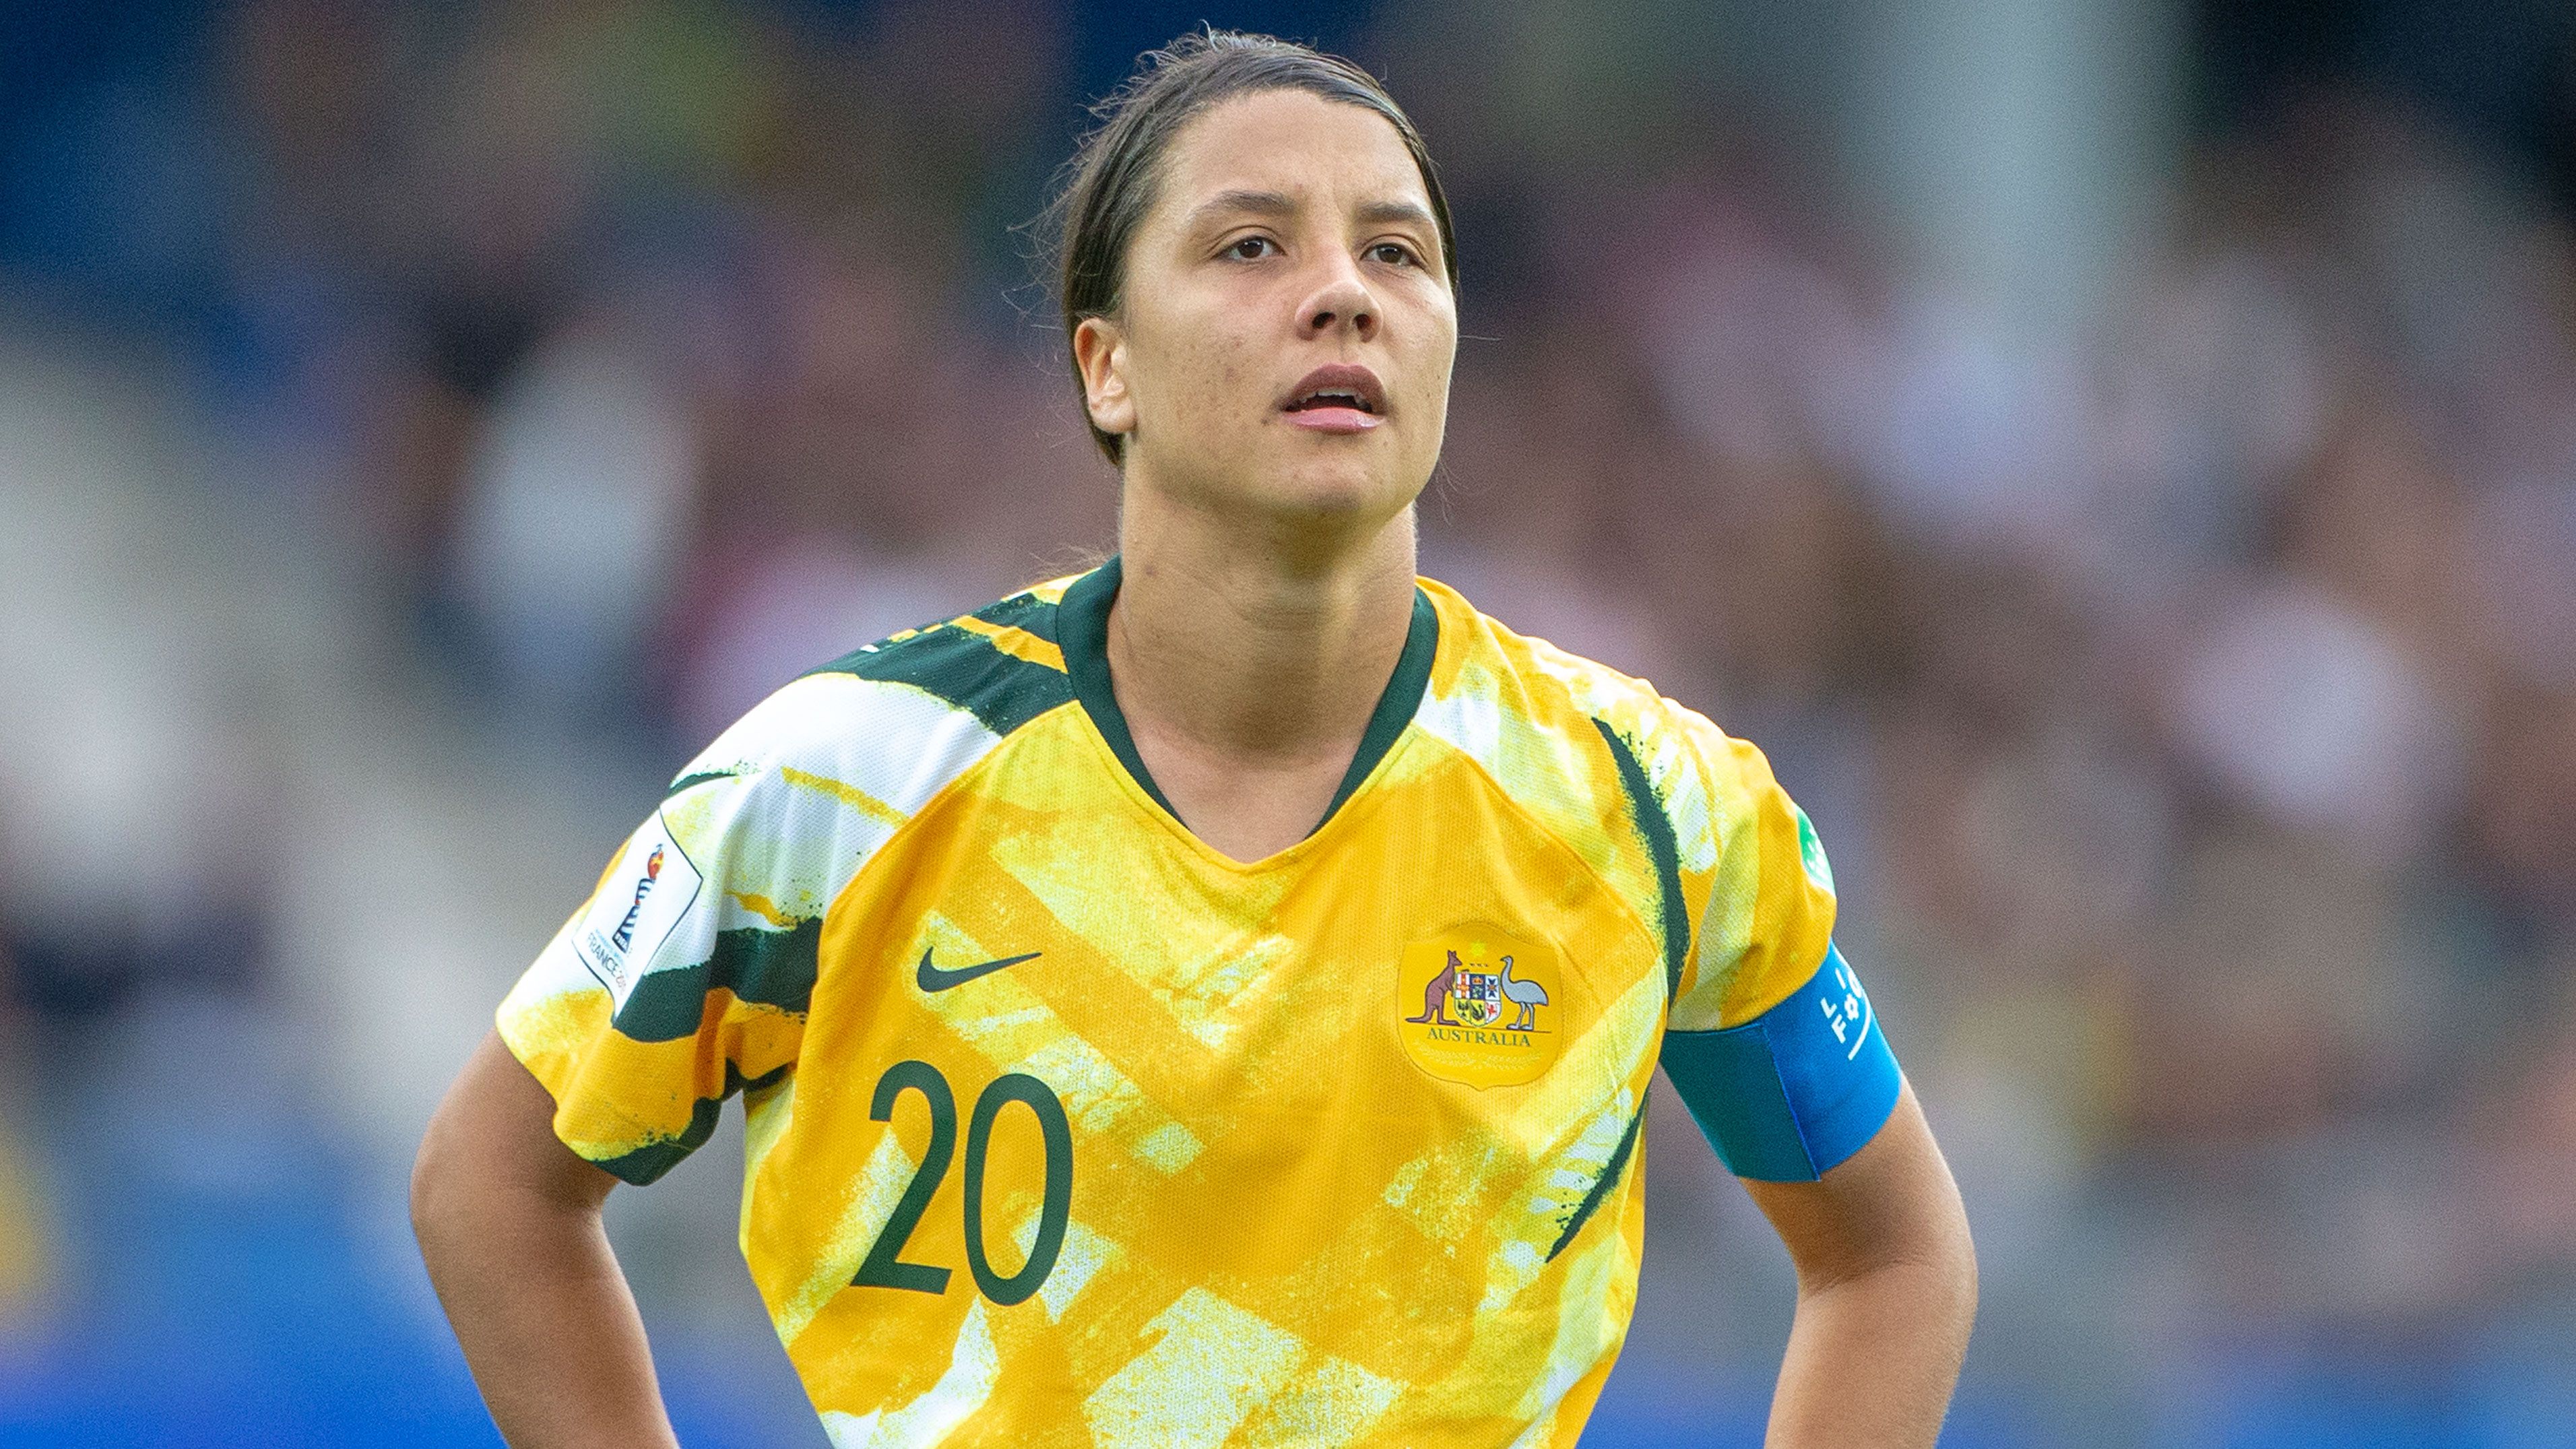 Matildas star Sam Kerr opens up on falling out with former AFL star brother Daniel